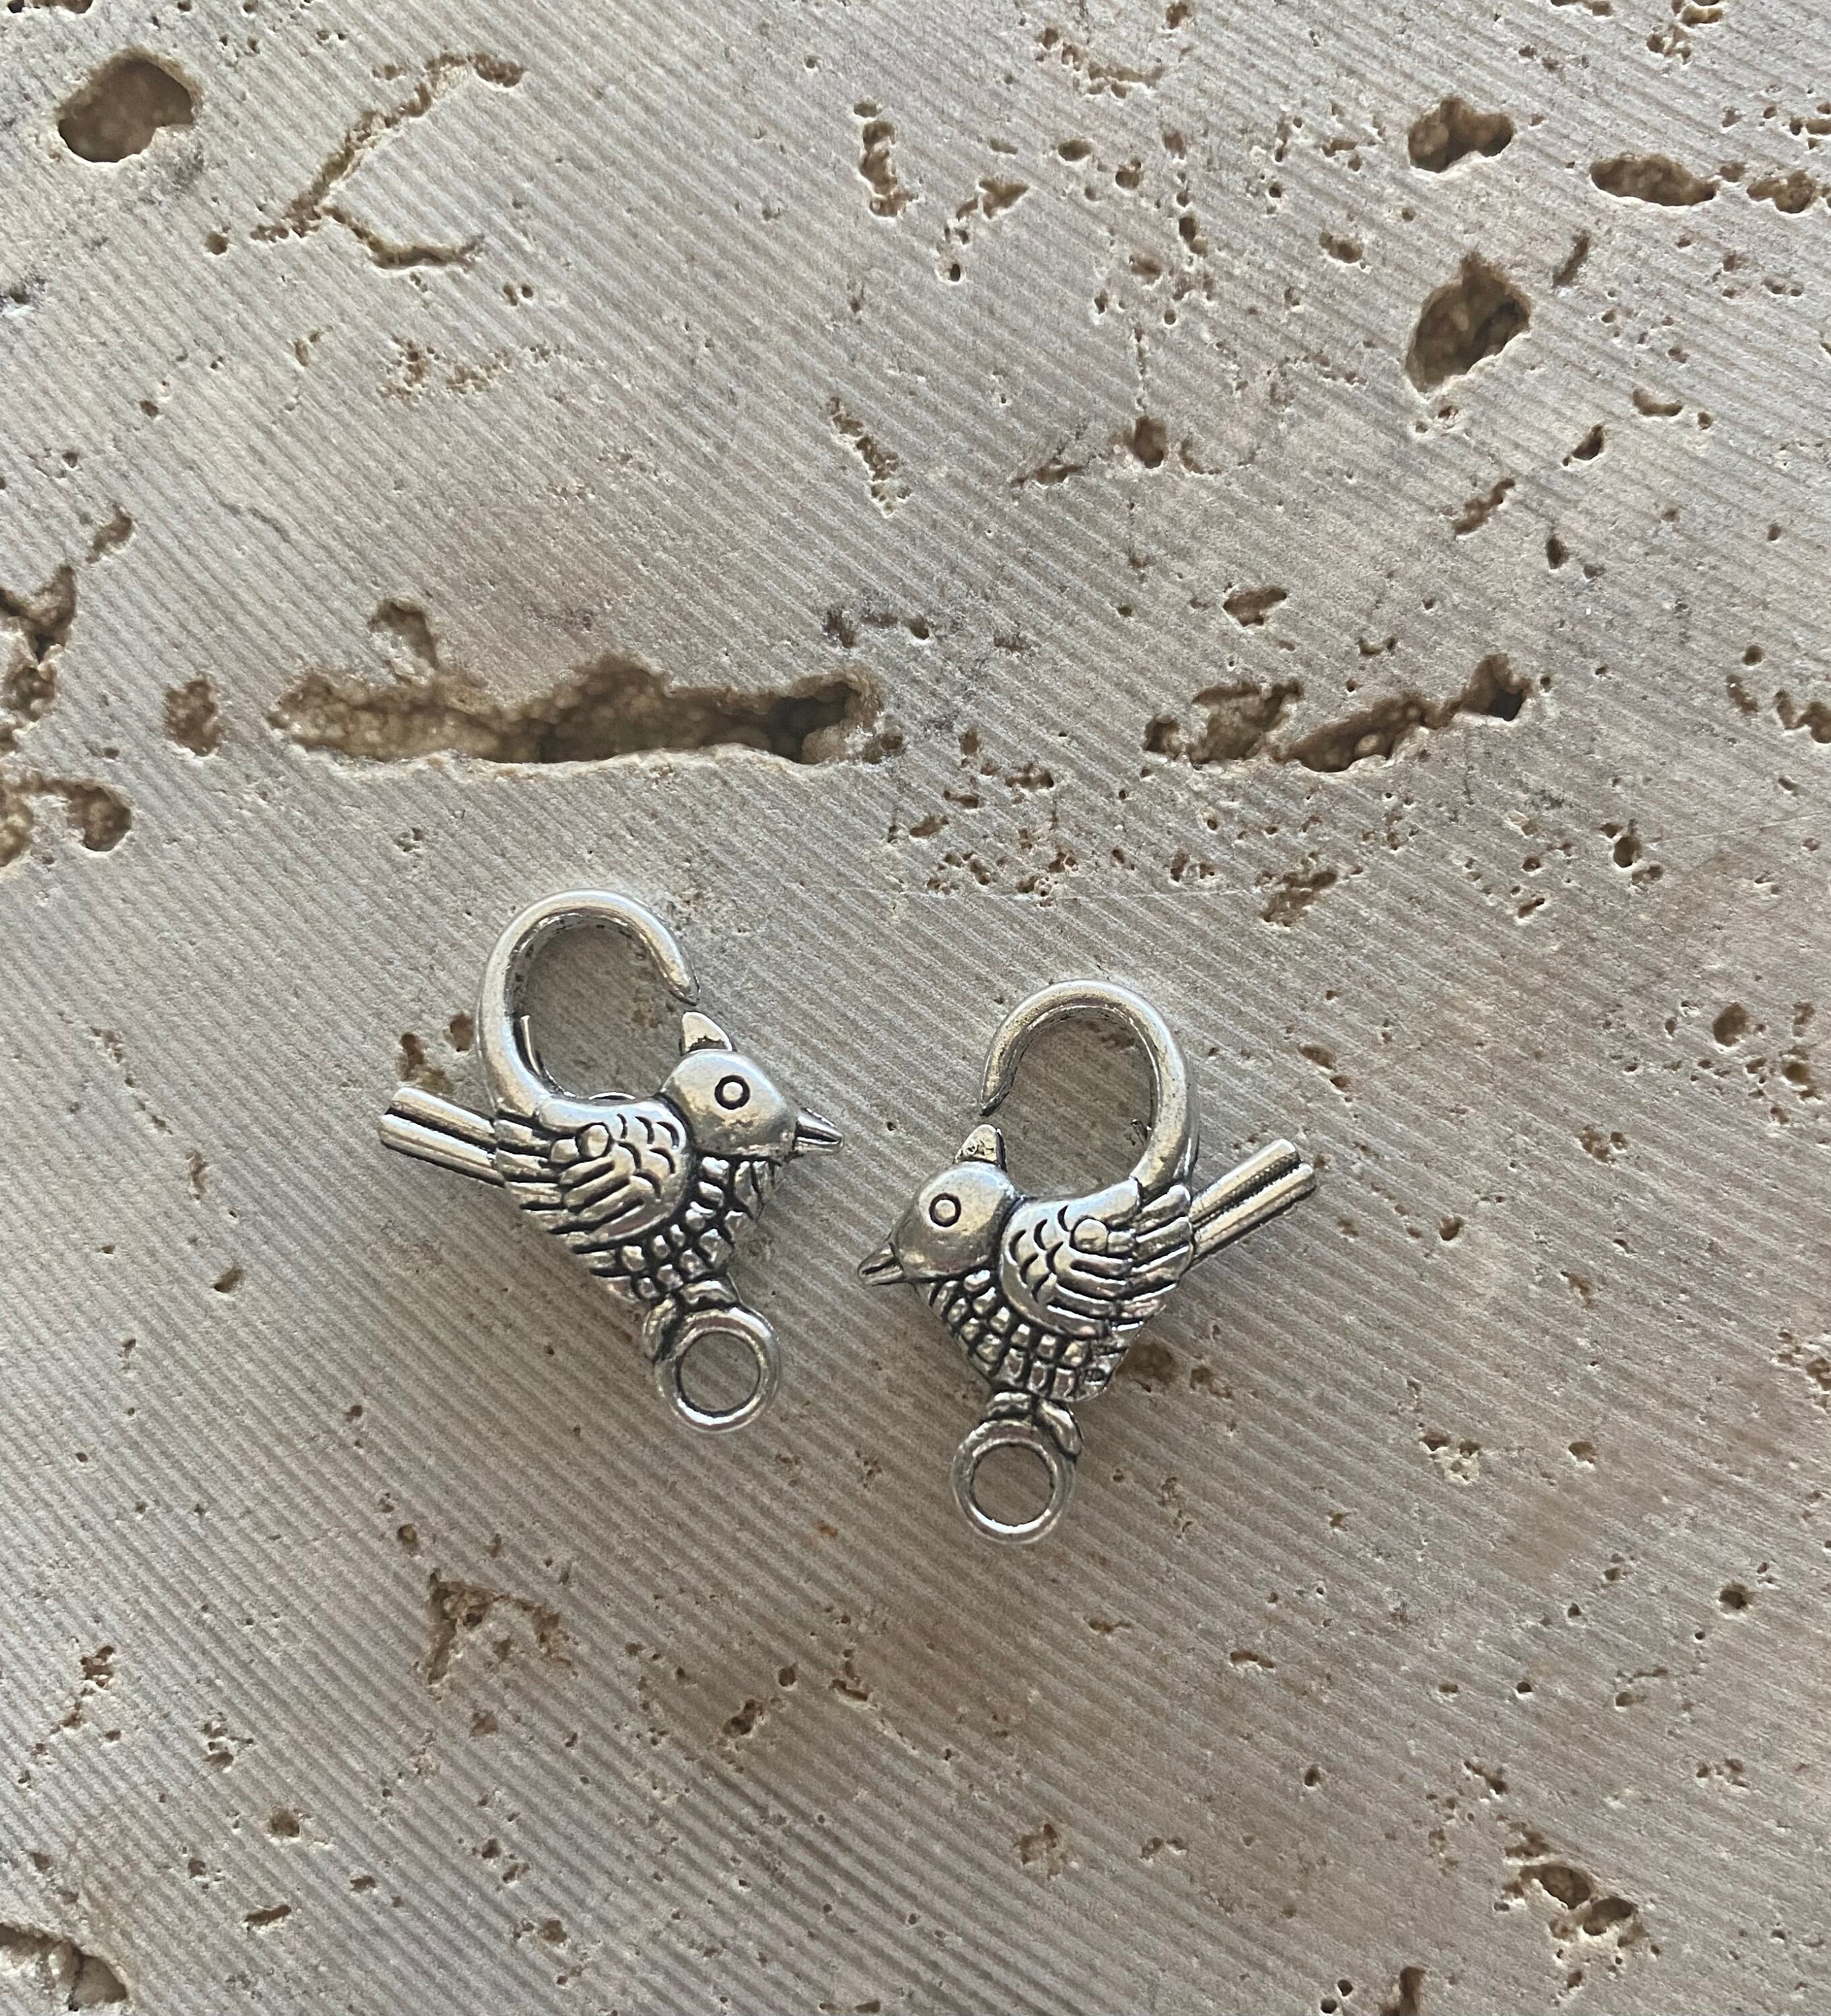 Sterling Silver Lobster Clasp, S925 Silver Lobster Clasps for